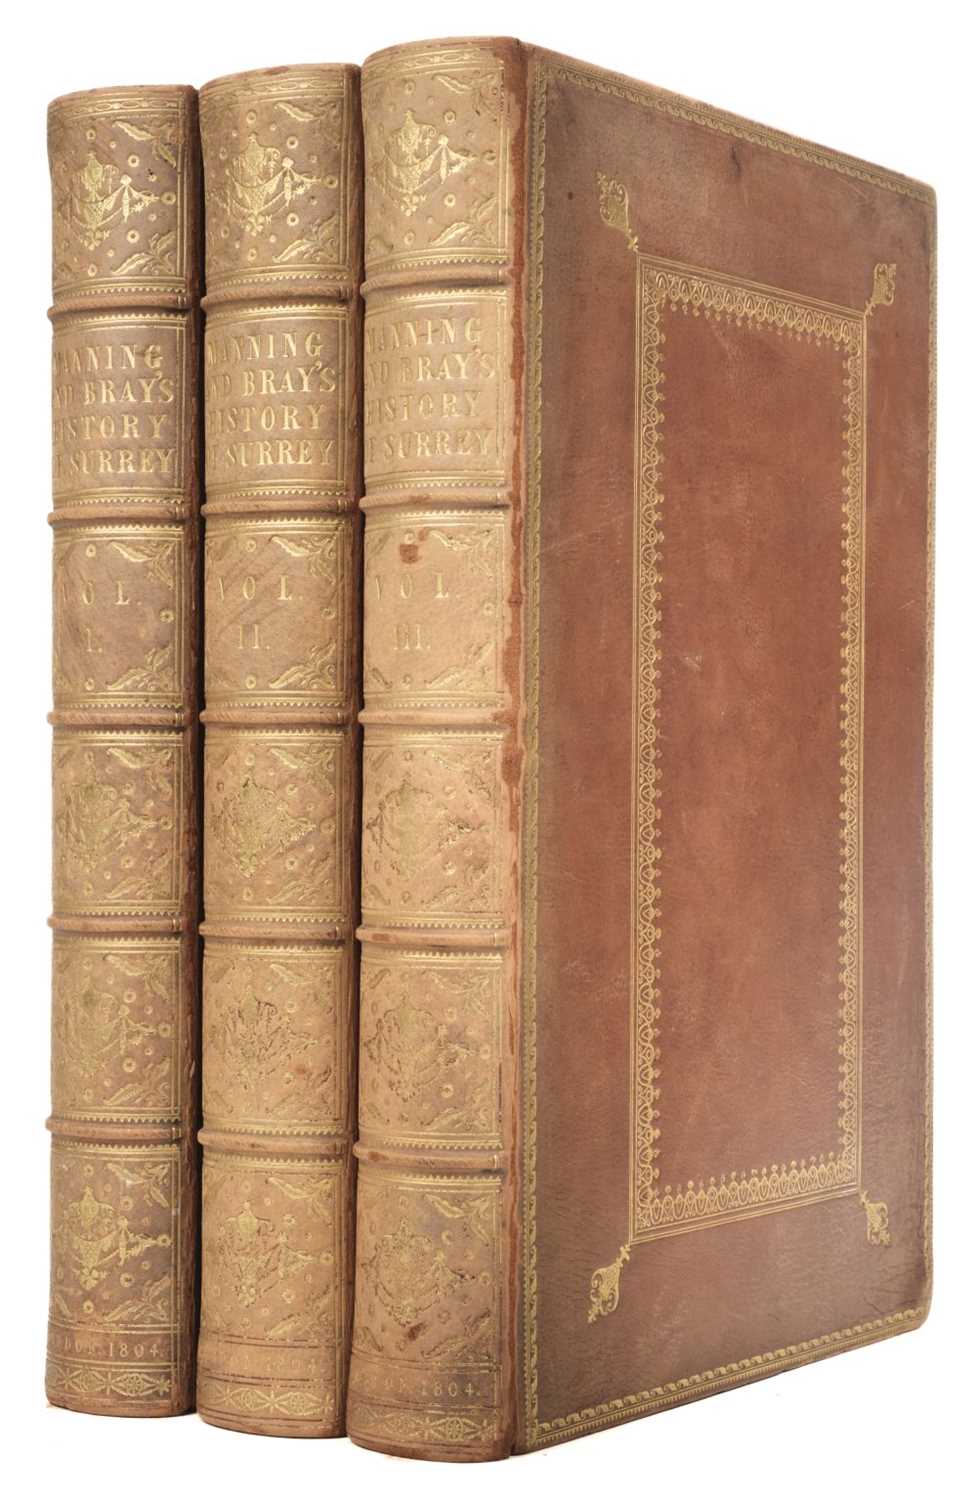 Lot 60 - Manning (Owen & Bray, W.). The History and Antiquities of the county of Surrey, 3 vols., 1804-14